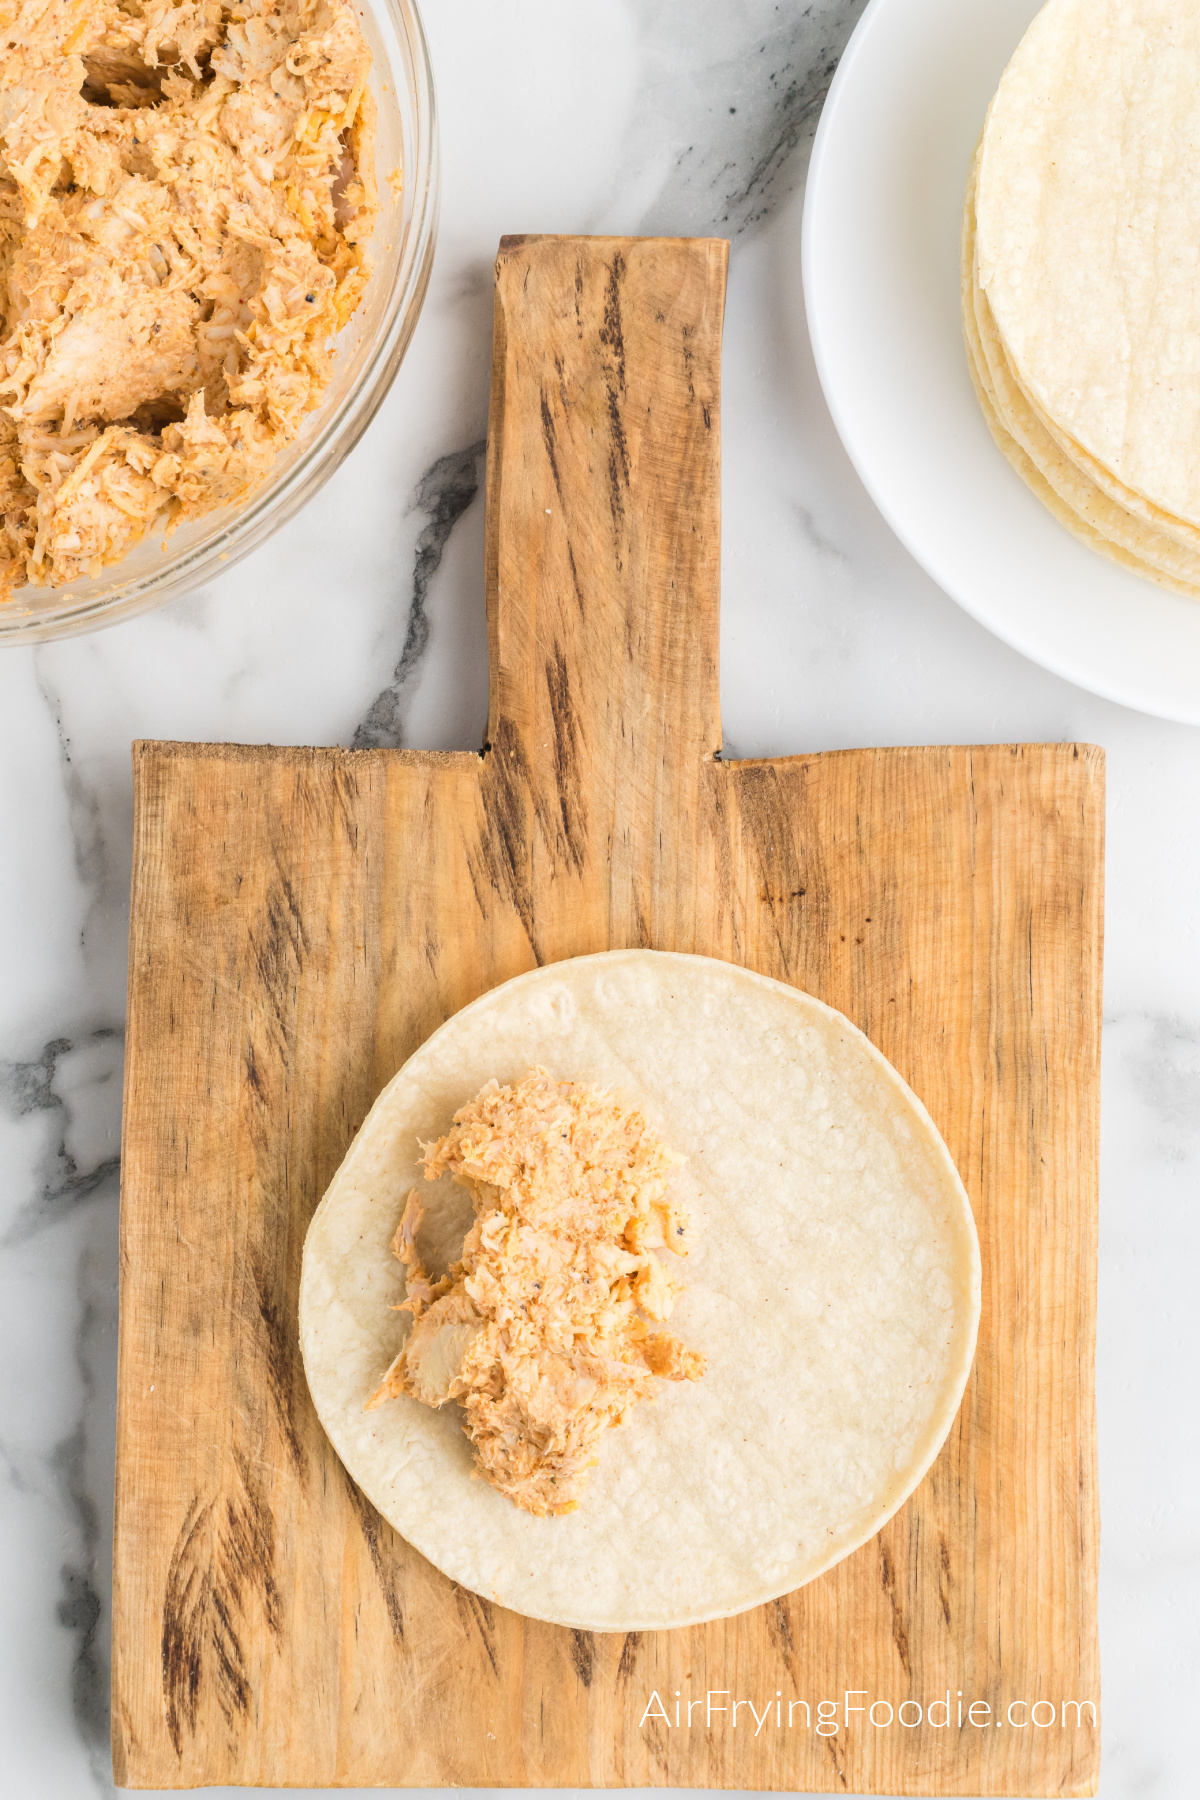 Chicken mixture placed into a tortilla shell.